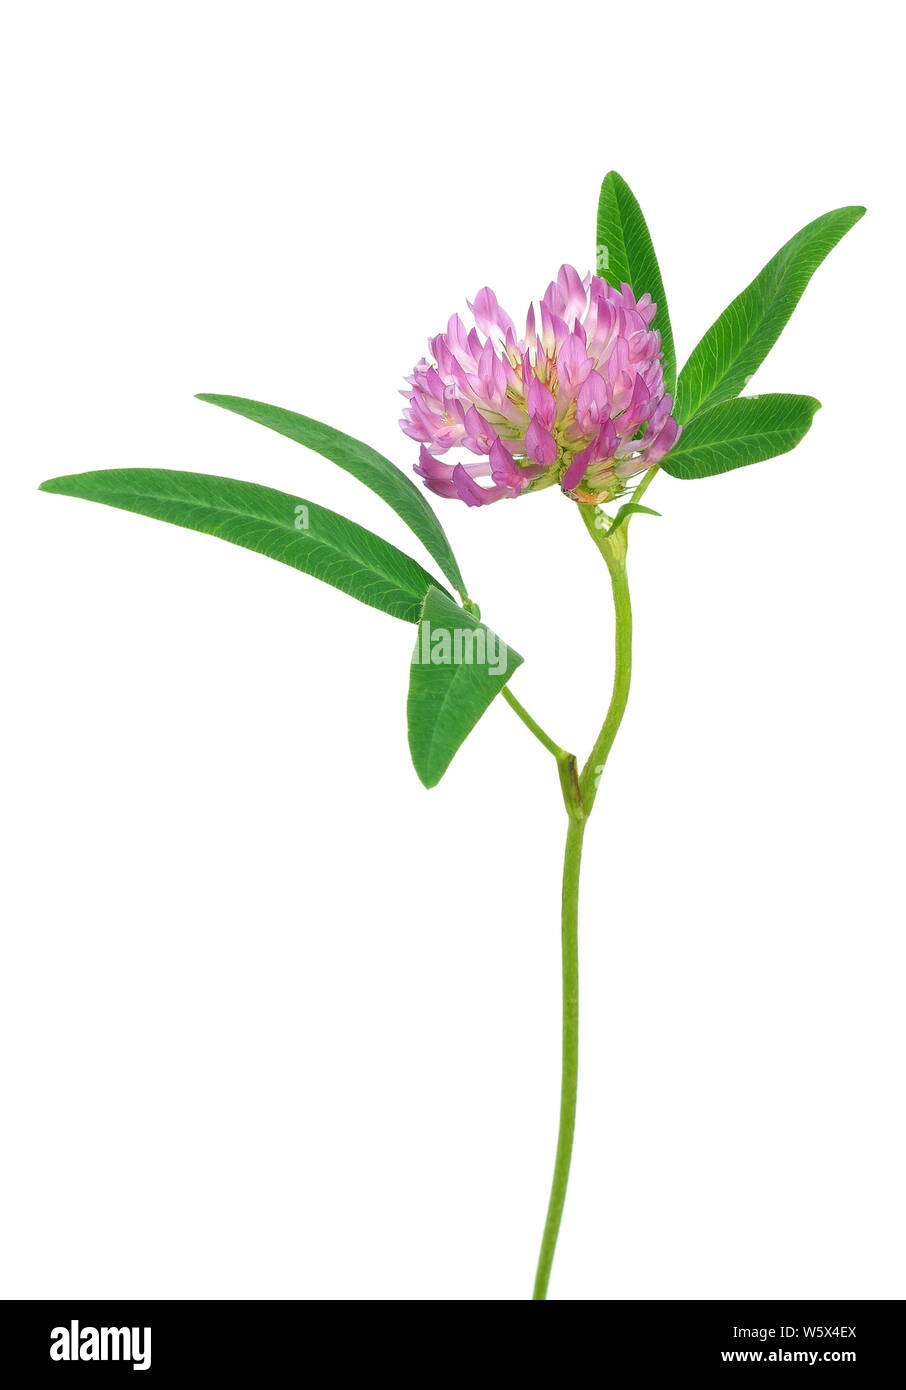 Clover flowers isolated on white background Stock Photo